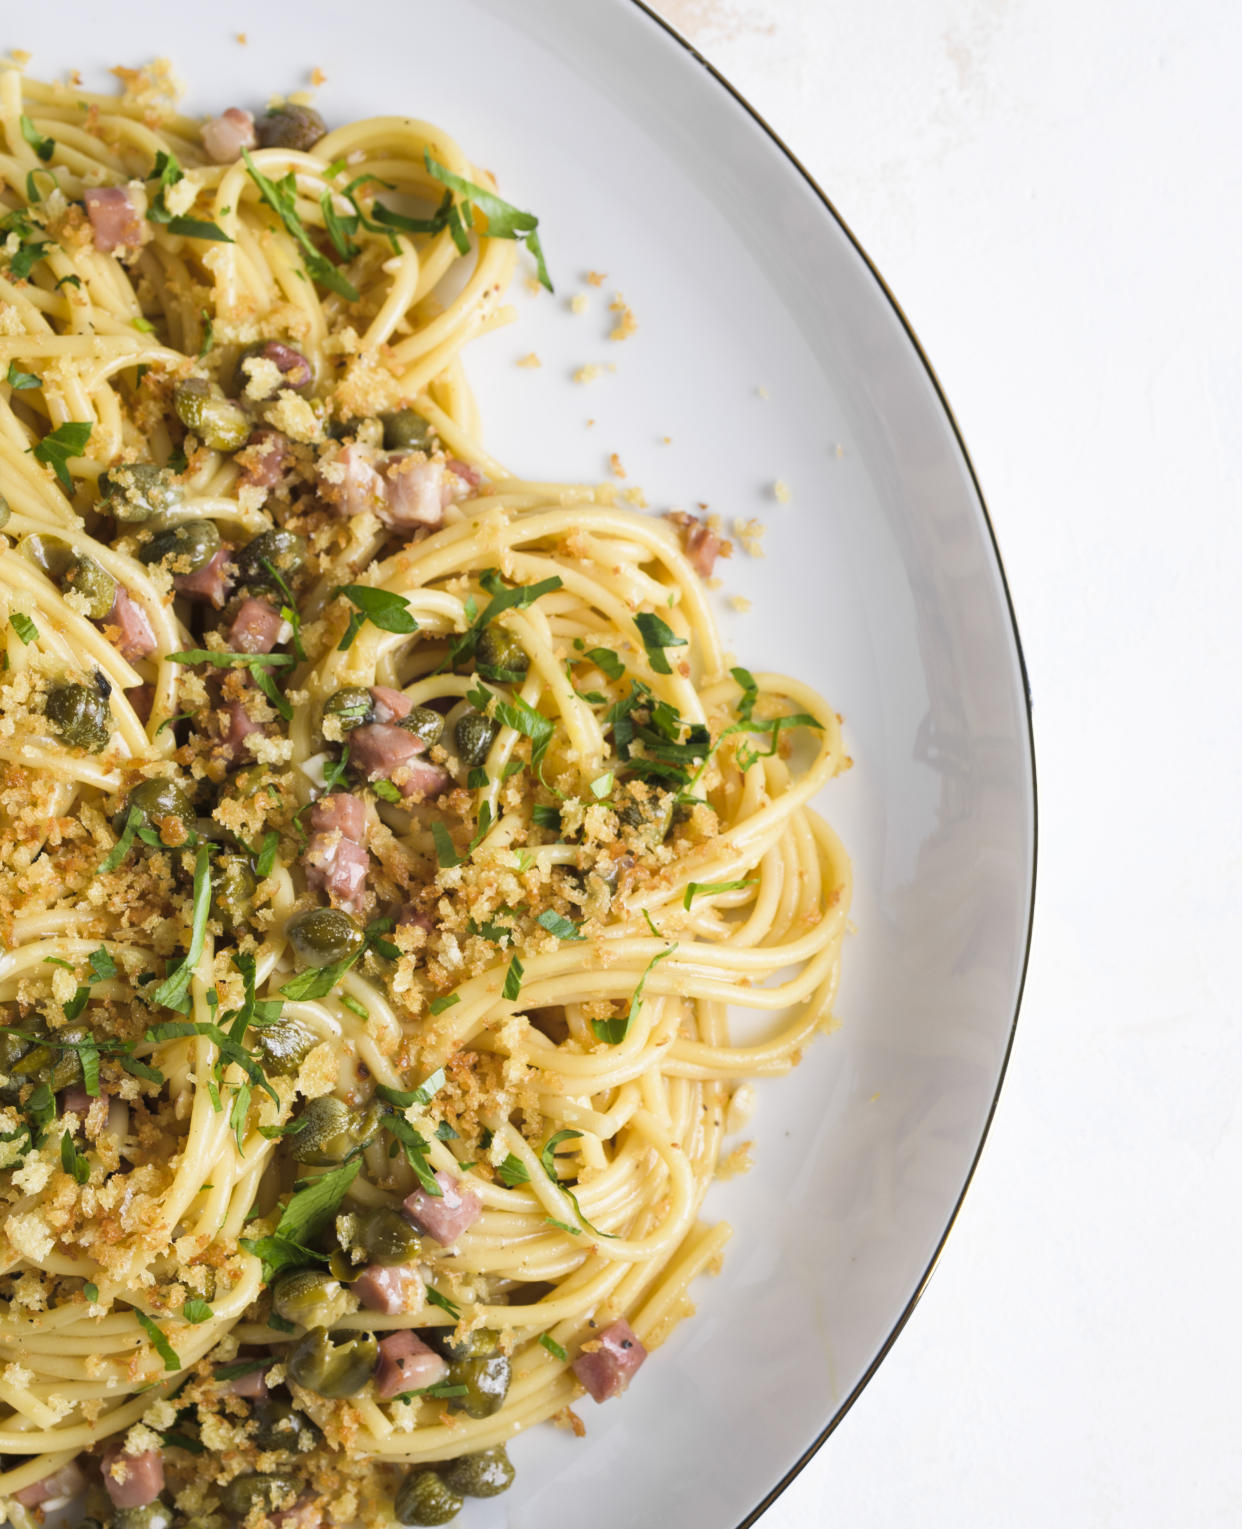 This image released by Milk Street shows a recipe for Lemon Caper Spaghetti with Pancetta and Toasted Breadcrumbs. (Milk Street via AP)